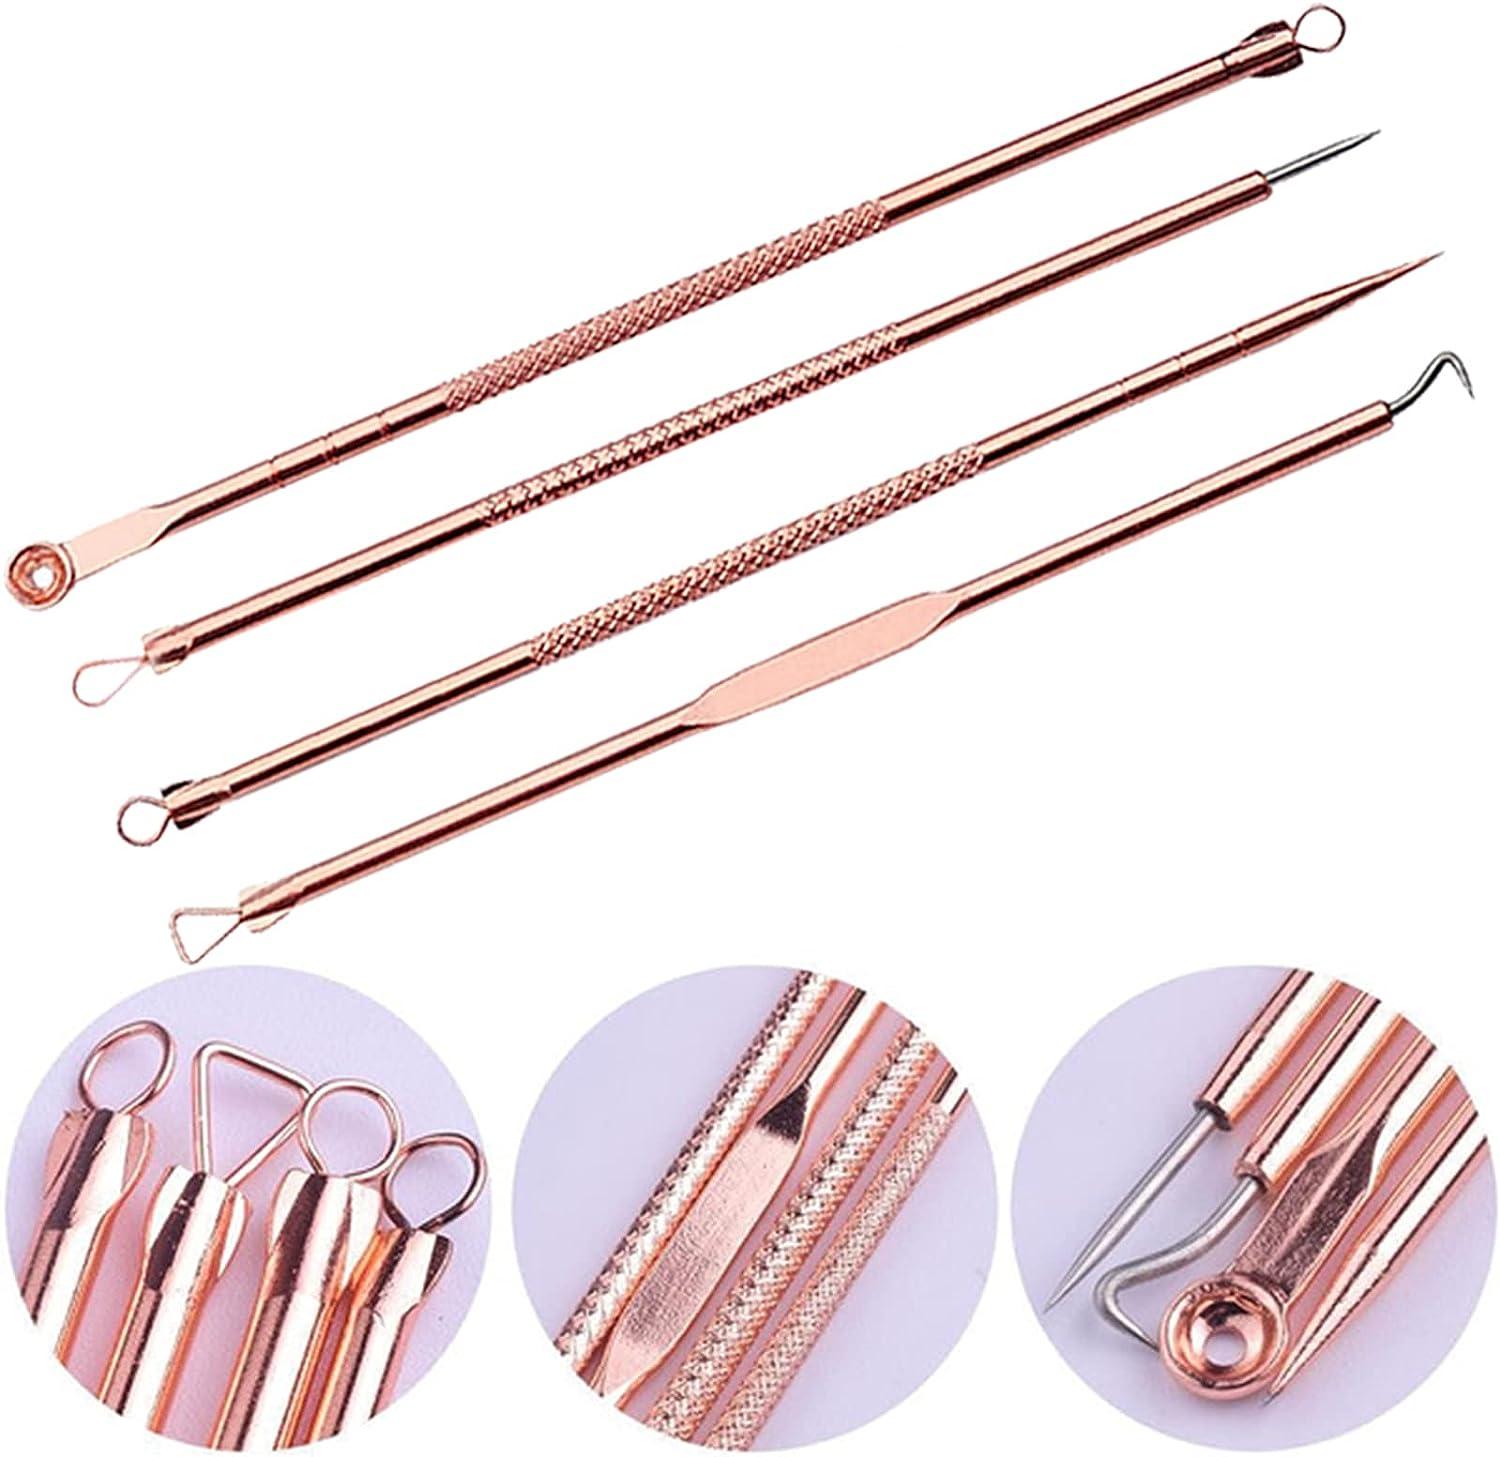 Cheap 4 pcs Stainless Steel Extractor Blackhead Remover Needles